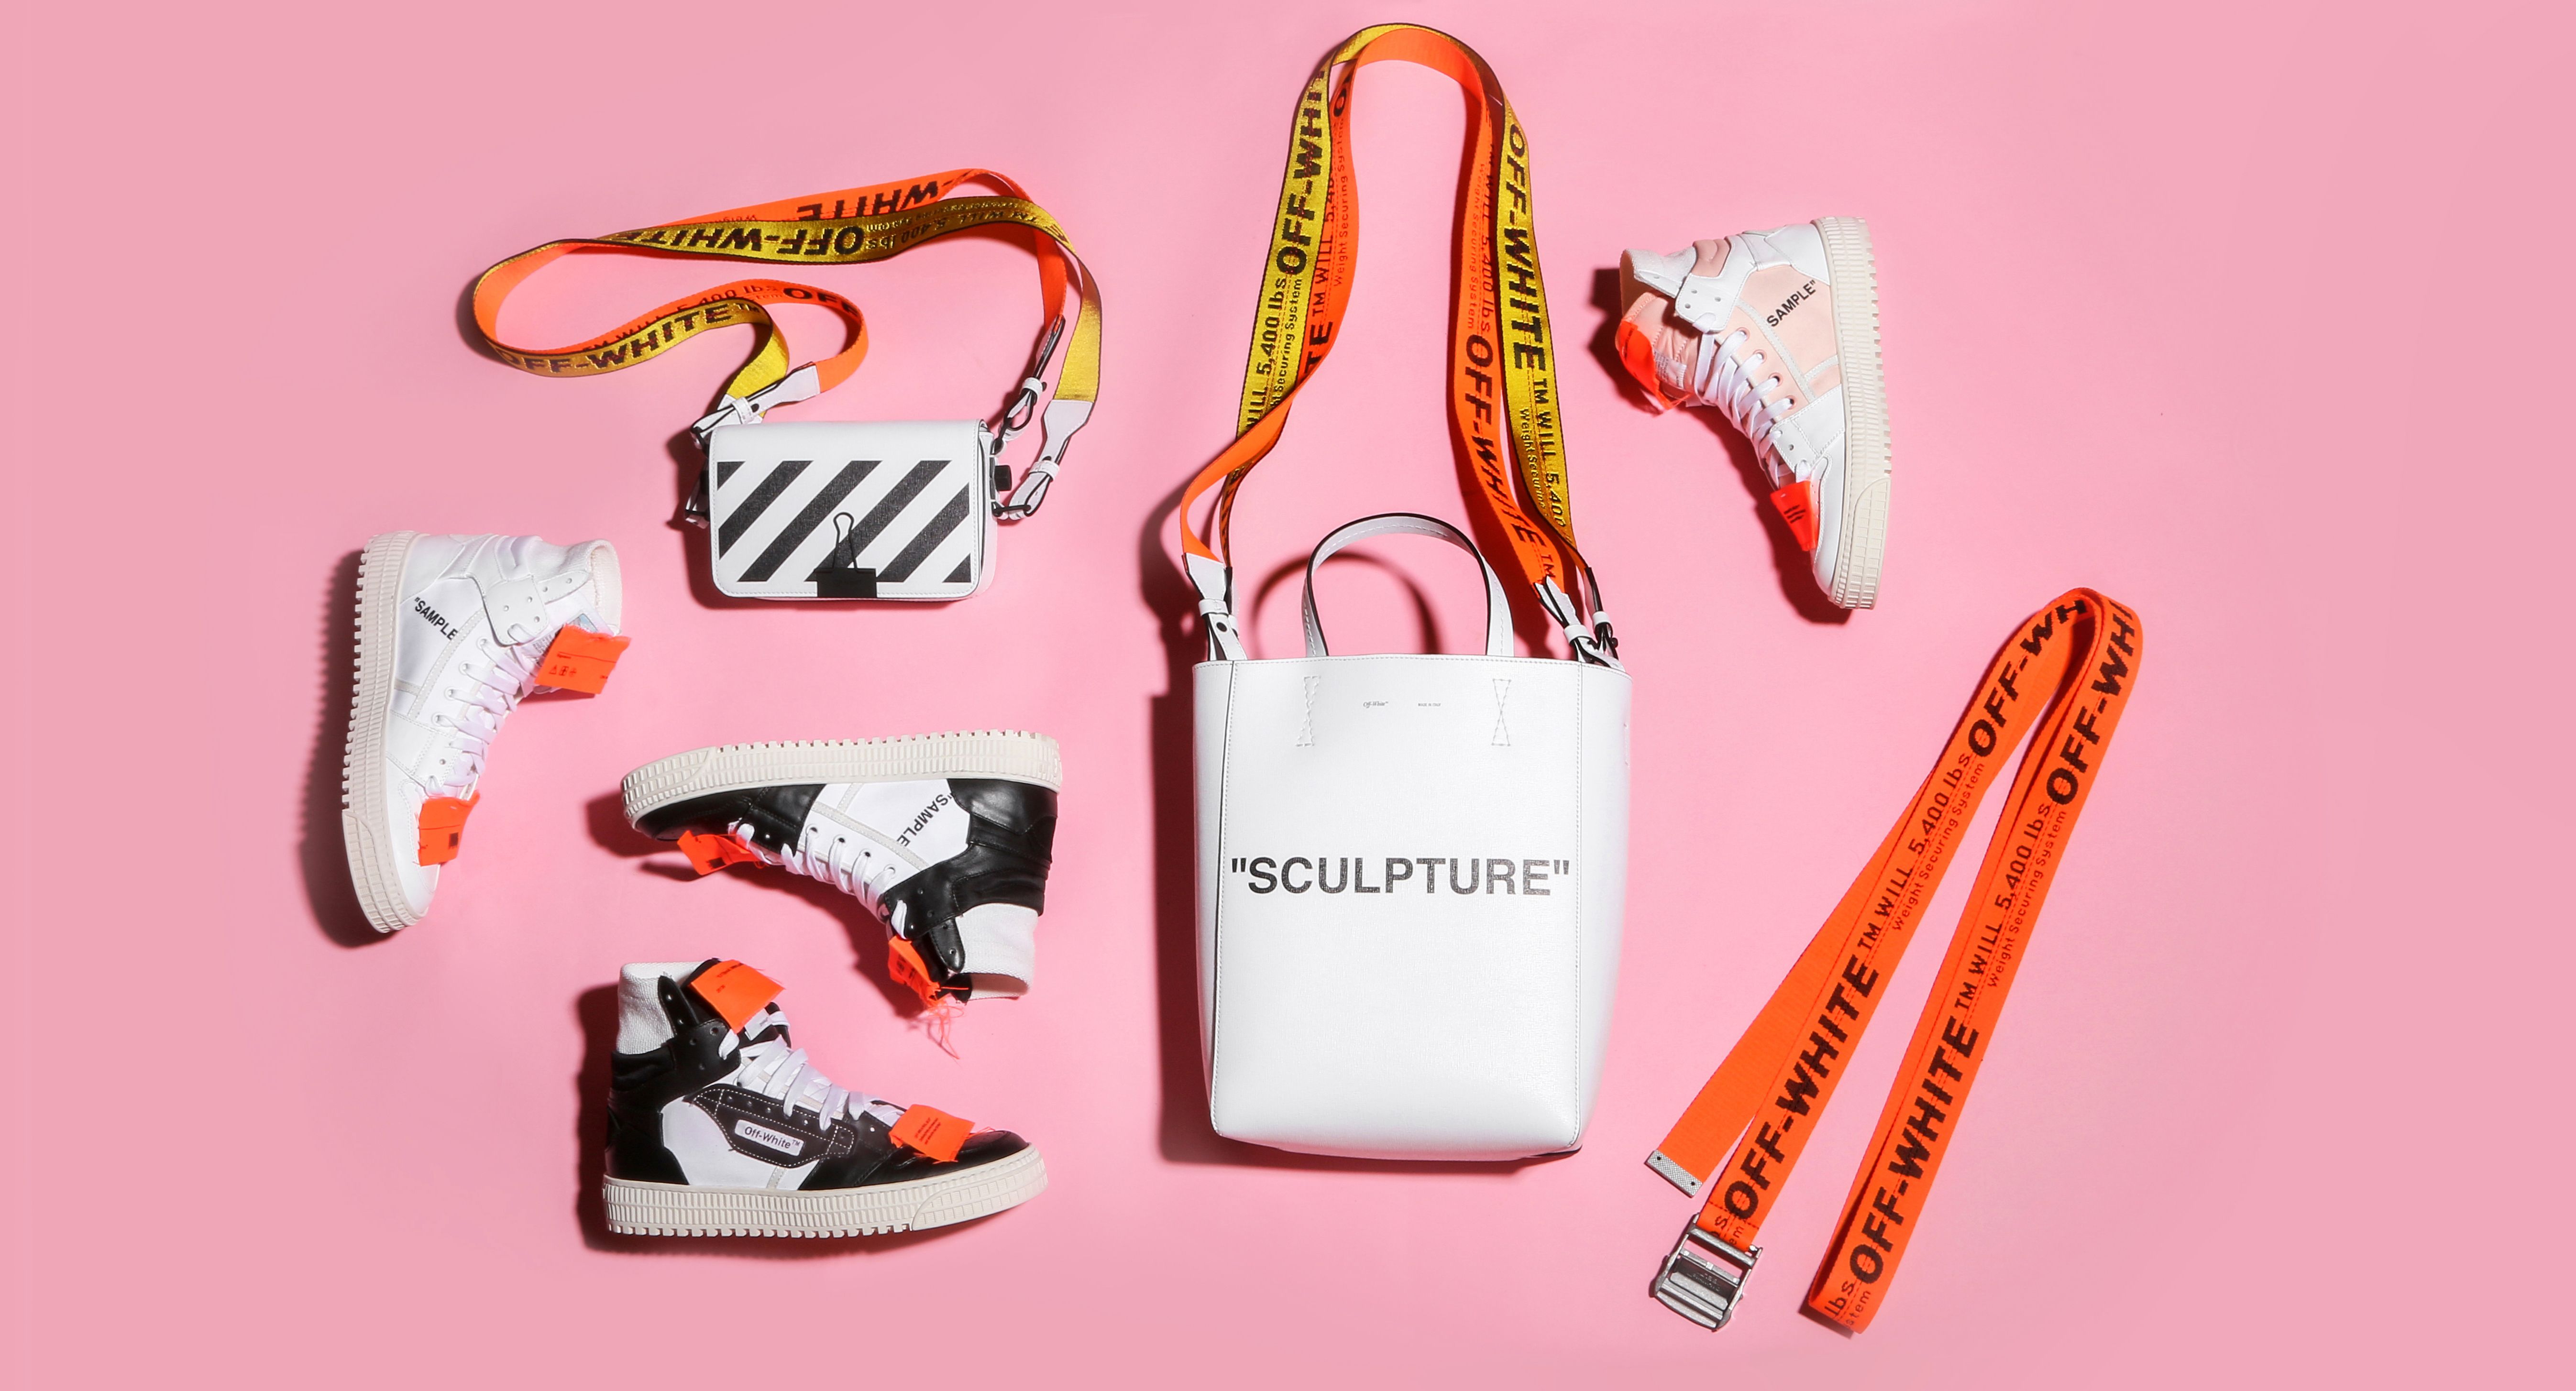 off white weight securing system shoes